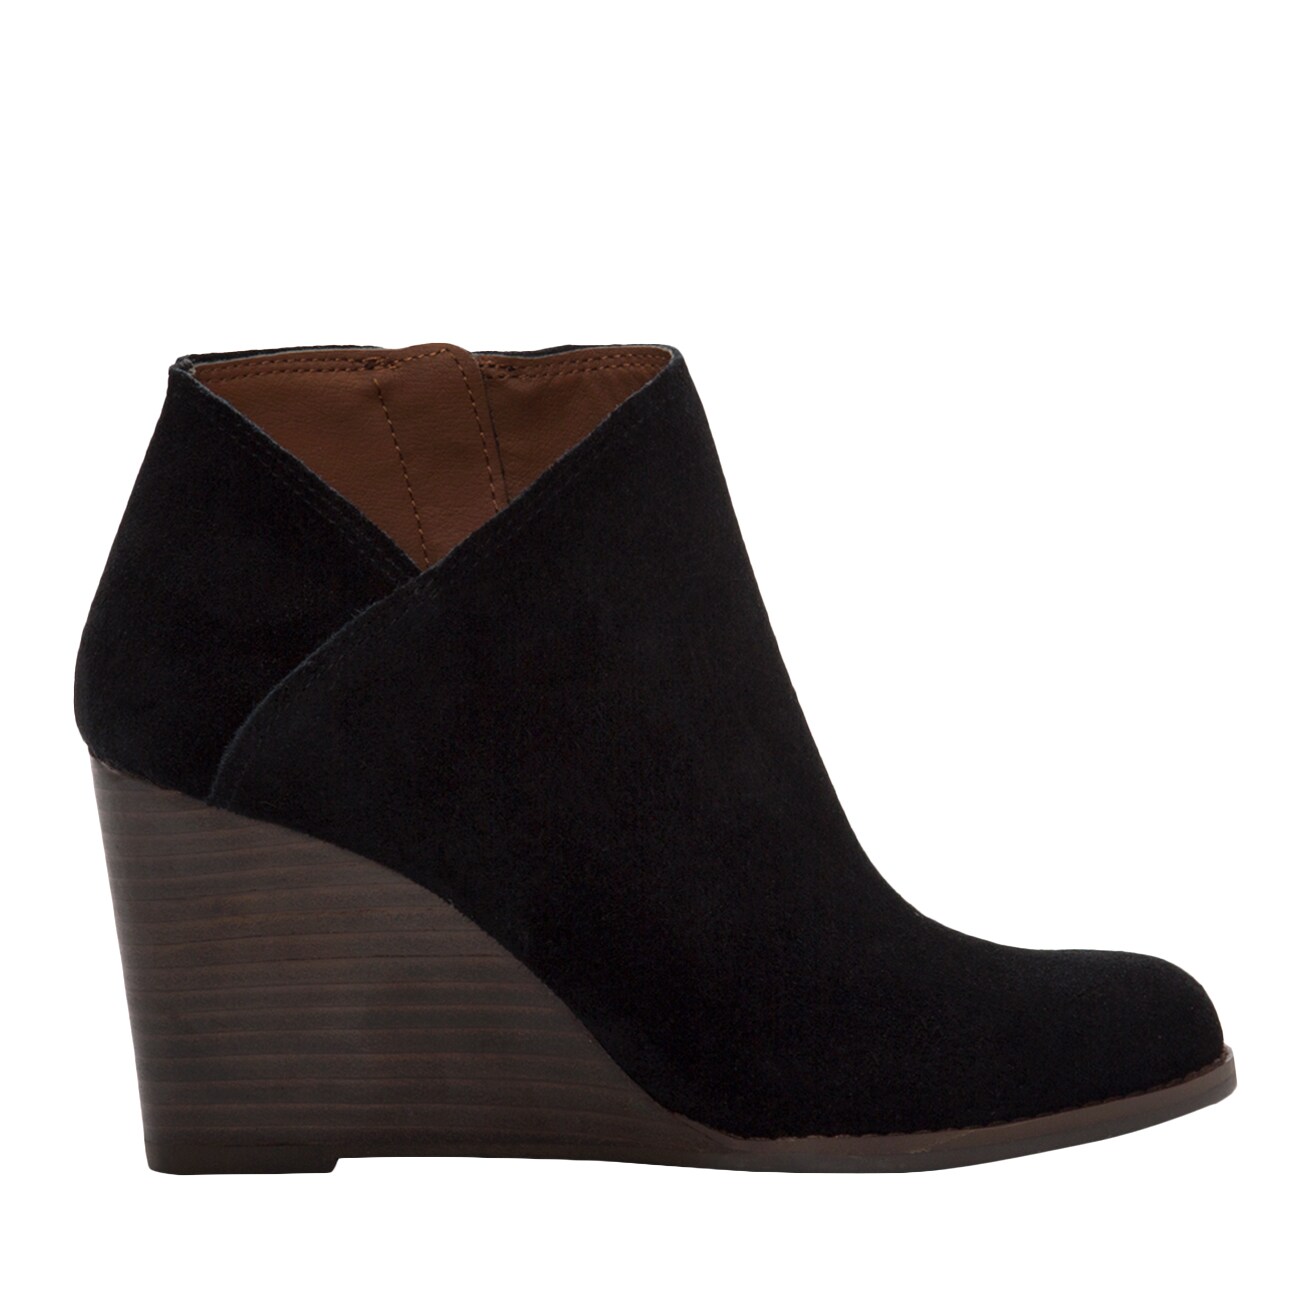 lucky brand booties canada